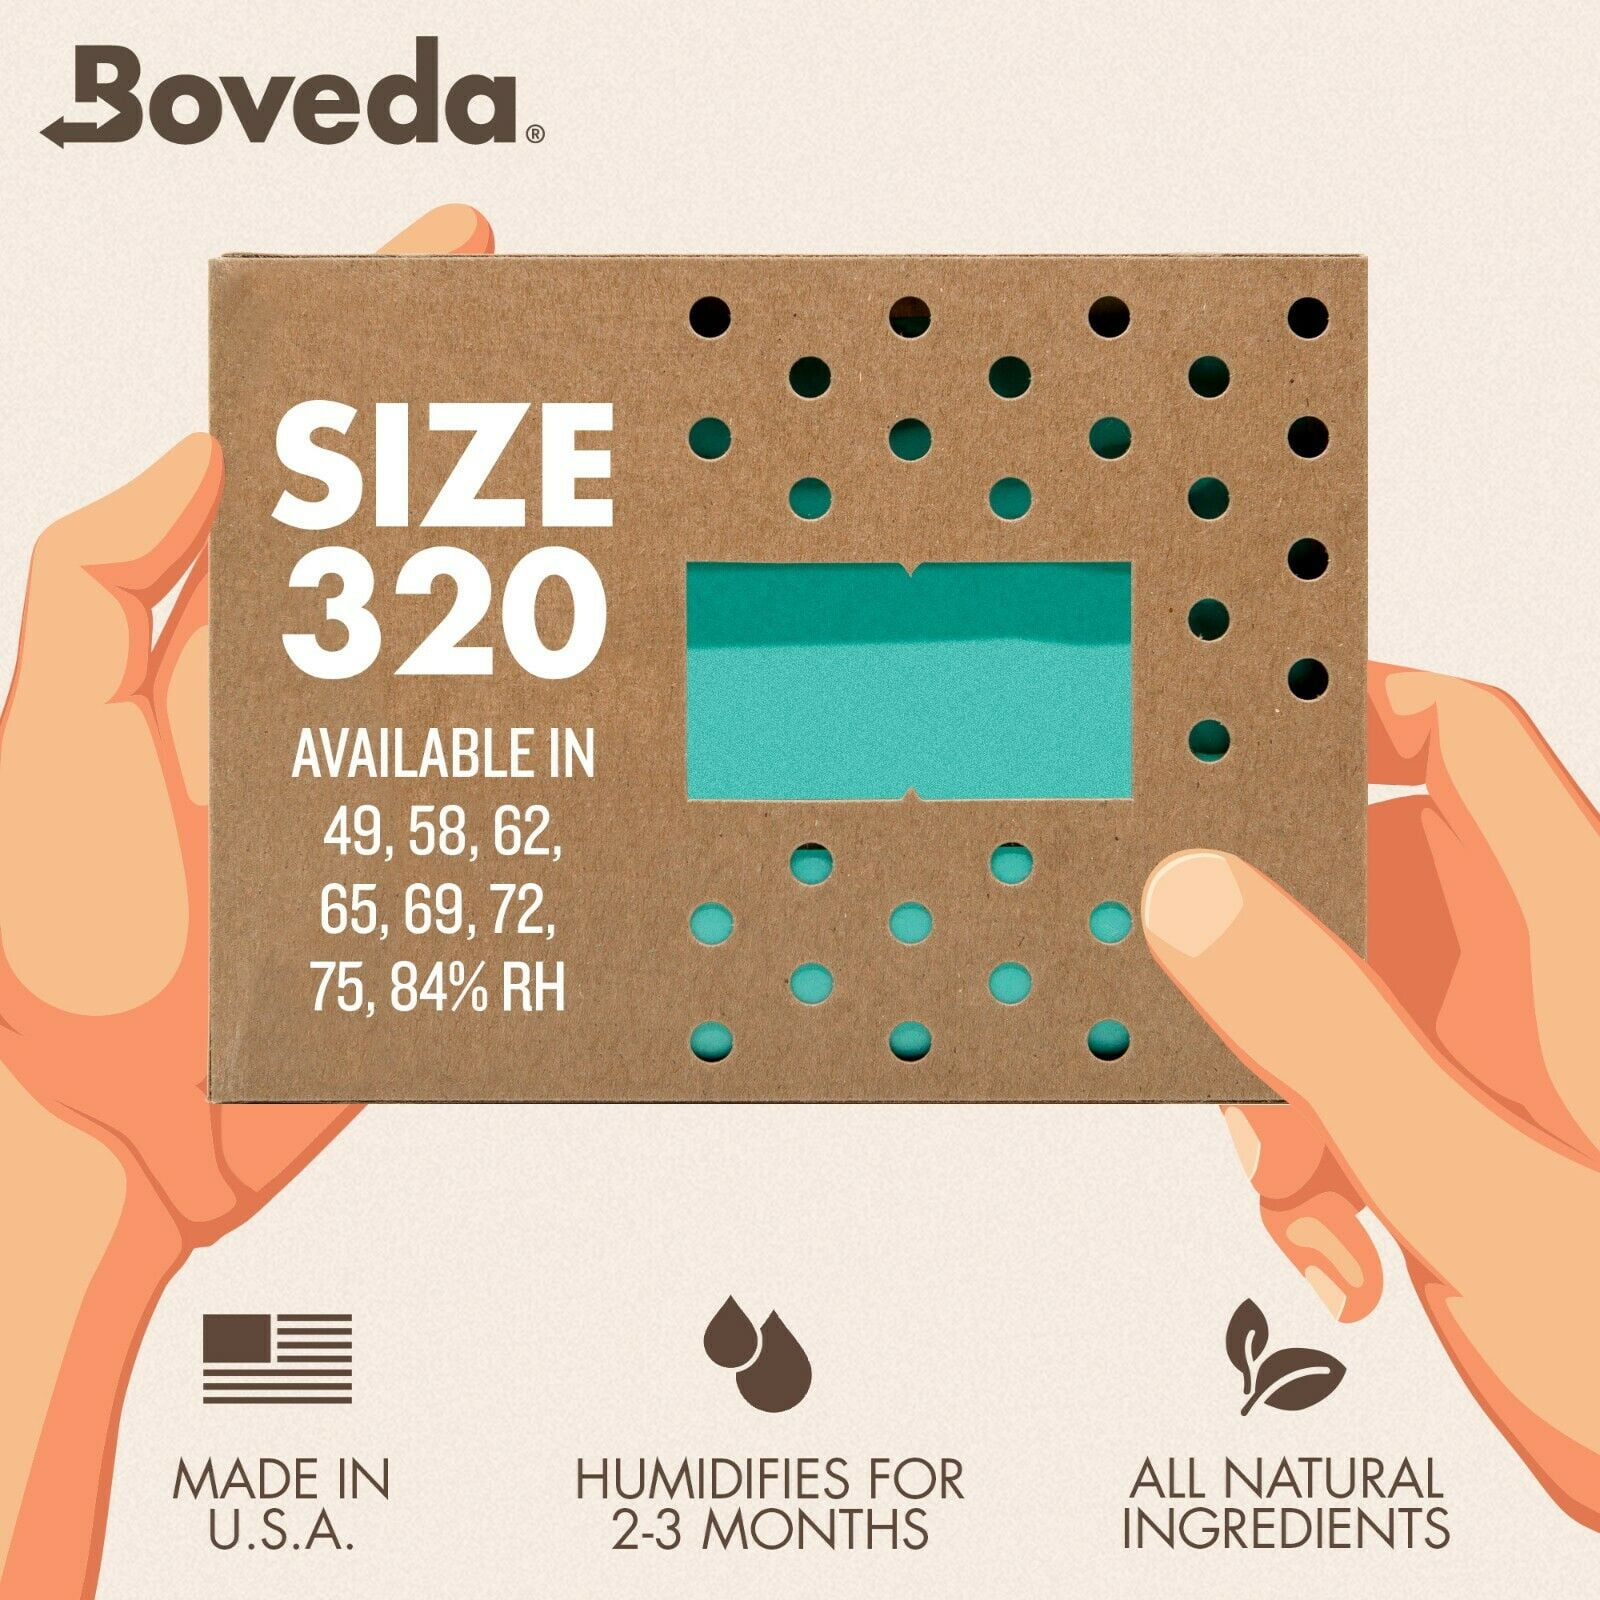 Boveda 72% Two-Way Humidity Control Packs for Woodwind Reeds – Size 8 – 2  Pack – Moisture Absorbers – Protects Against Drying & Spliting –